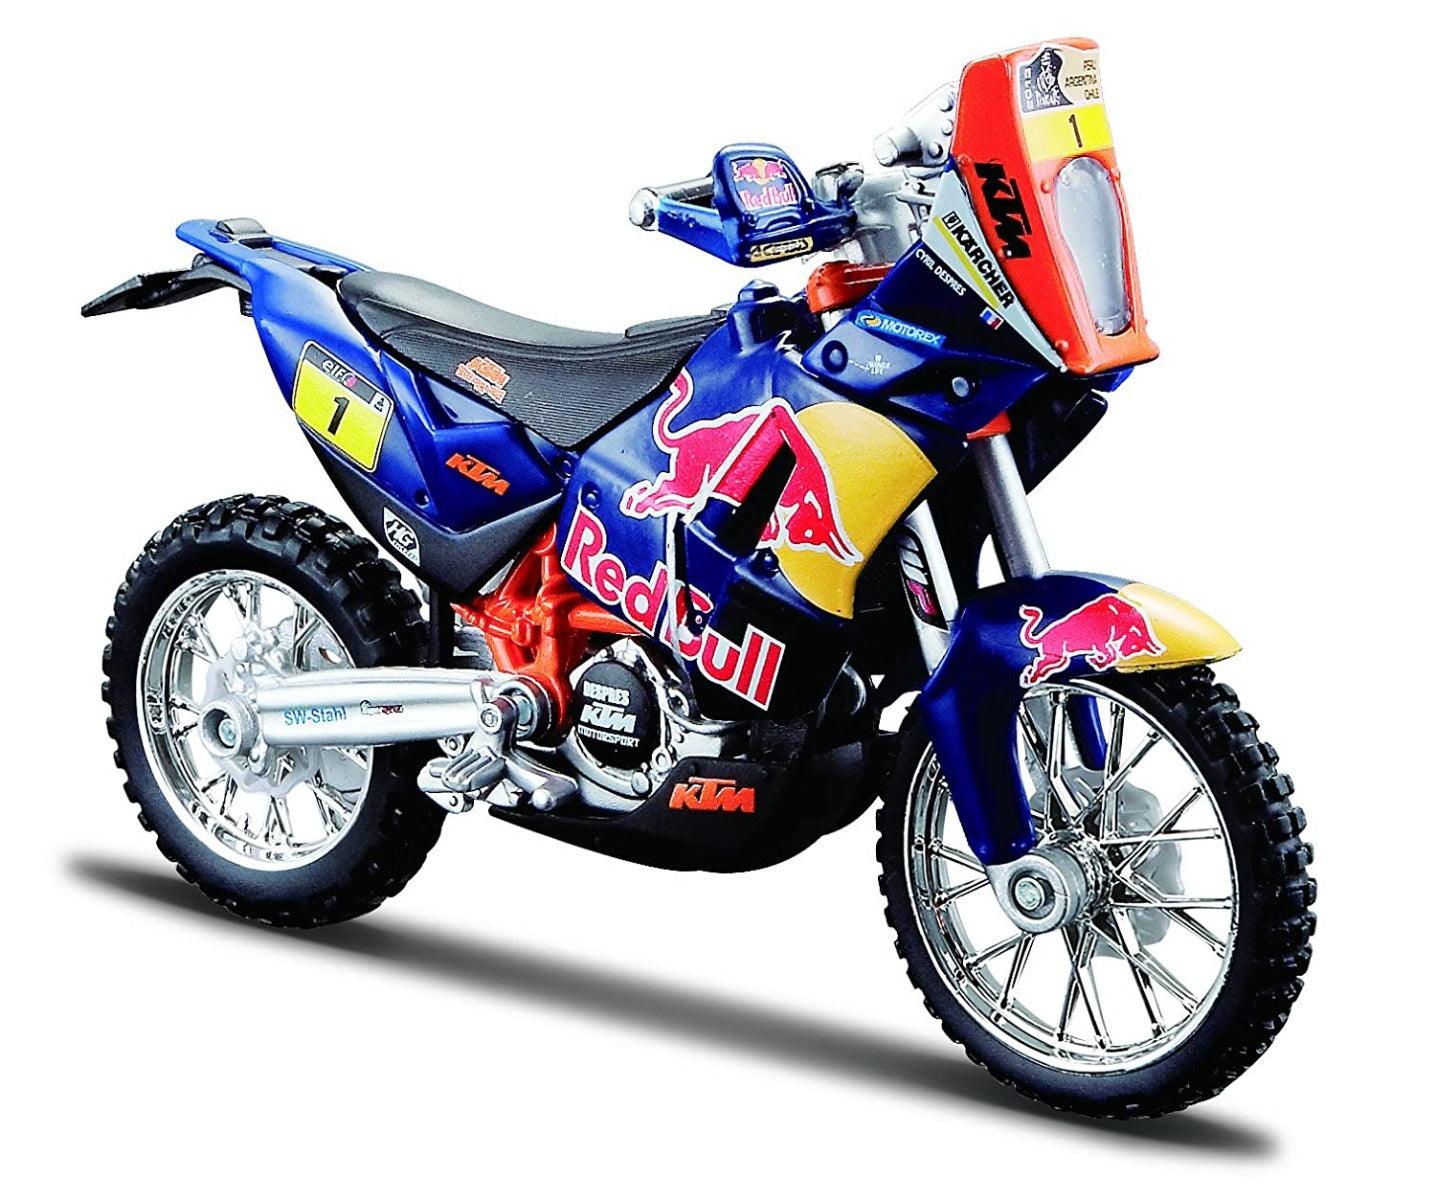 Bburago Die-Cast 1:18 Scale KTM 450 Dakar Rally Motorcycle (Blue) for Ages 5+